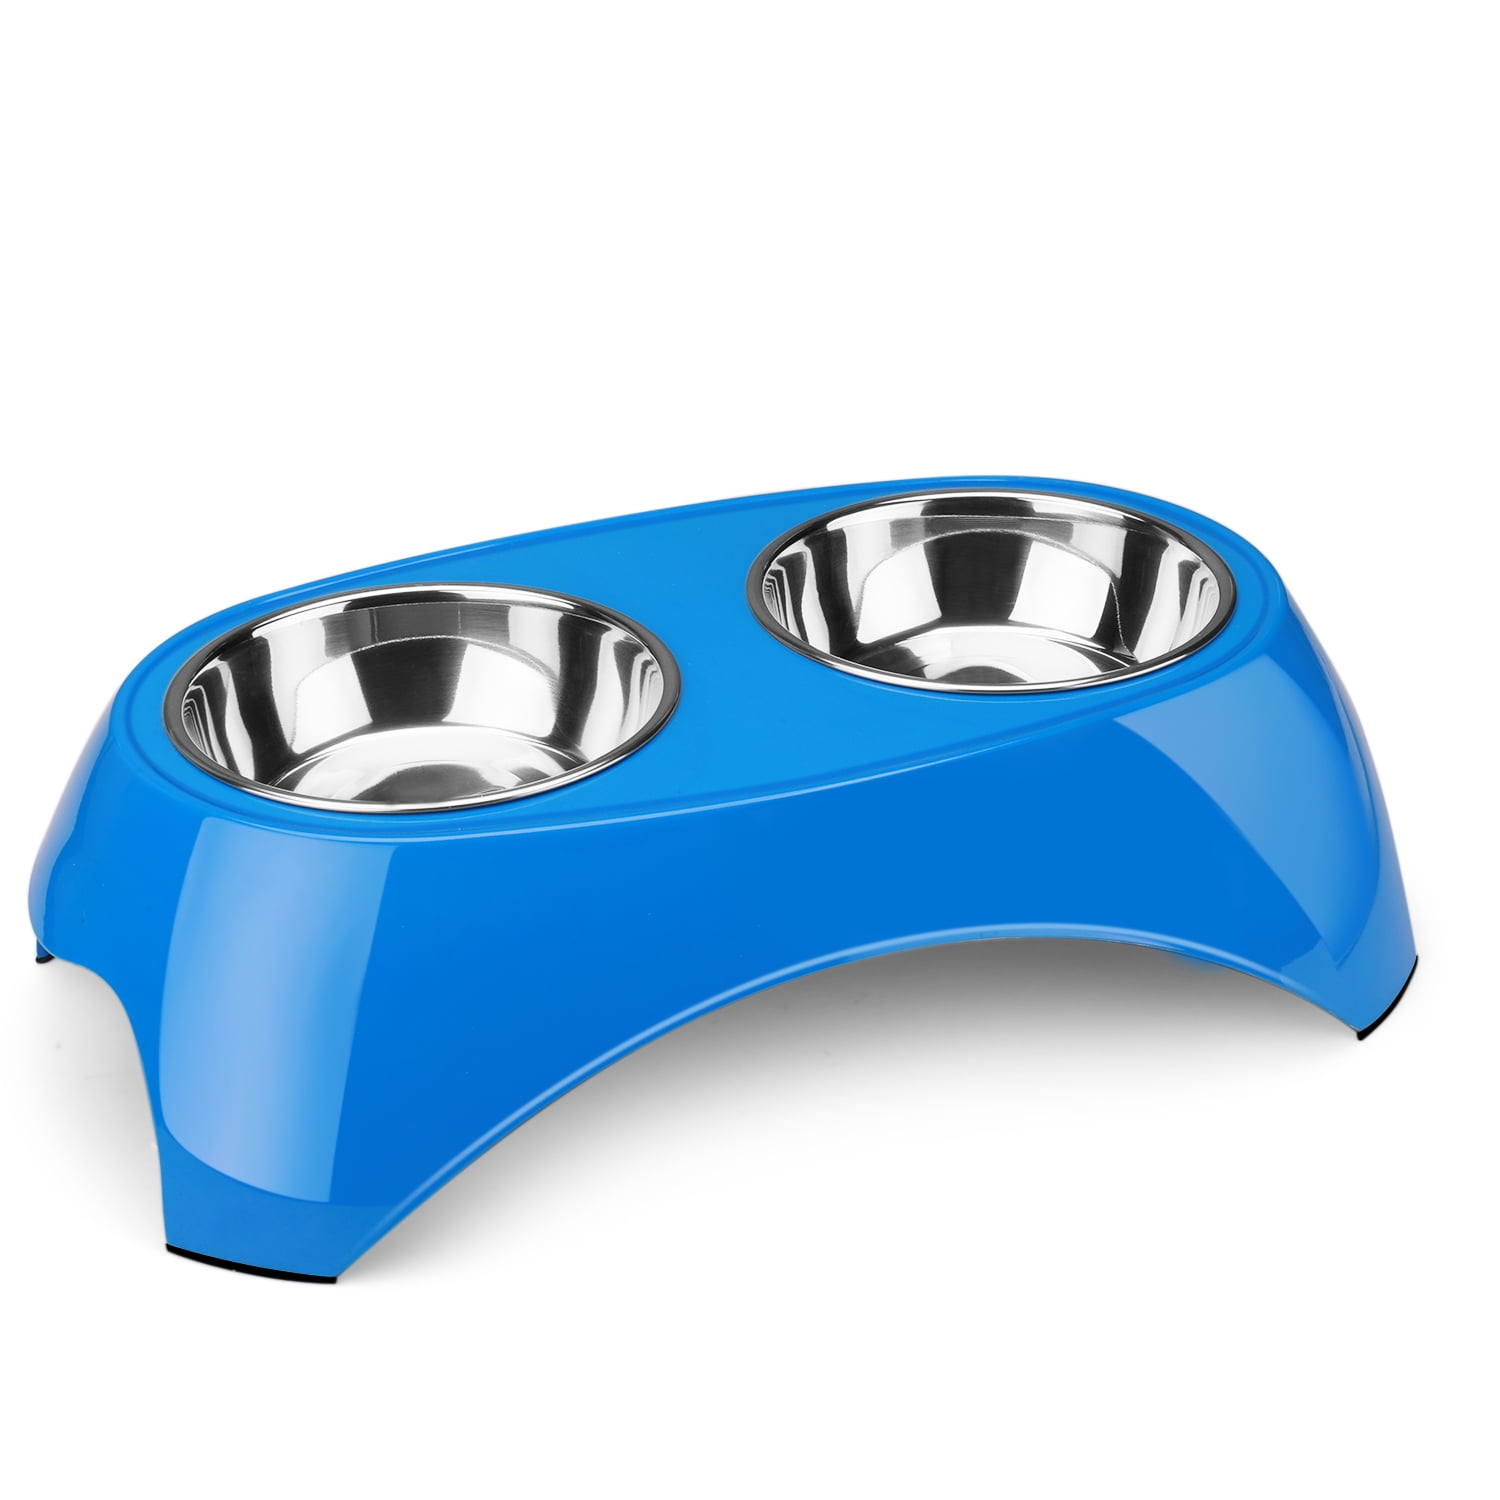 Pet Feeder Bowls Double Stainless Steel (Set of 2) Removable Raised Feeding Station Tray Dog